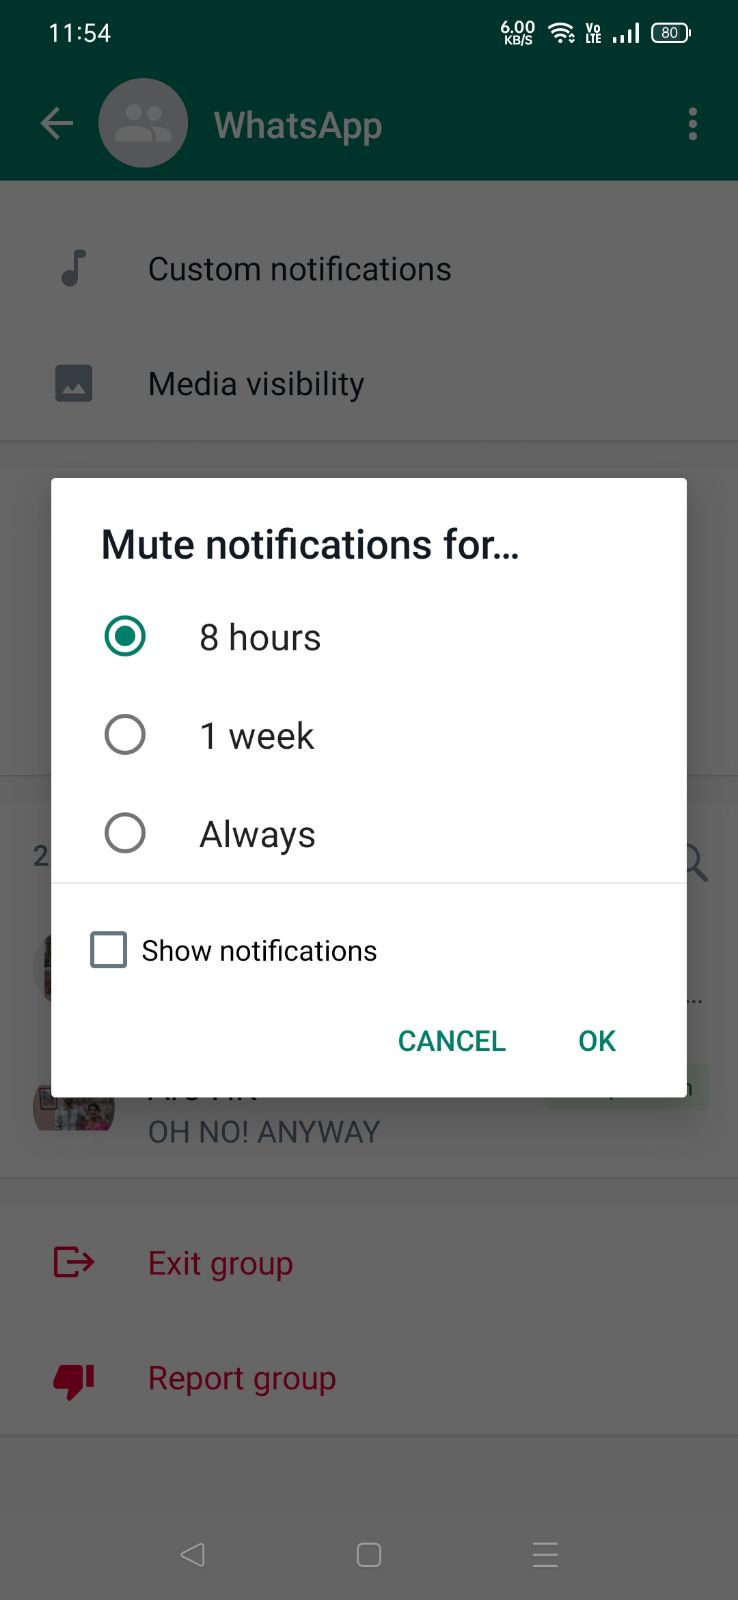 Select the duration